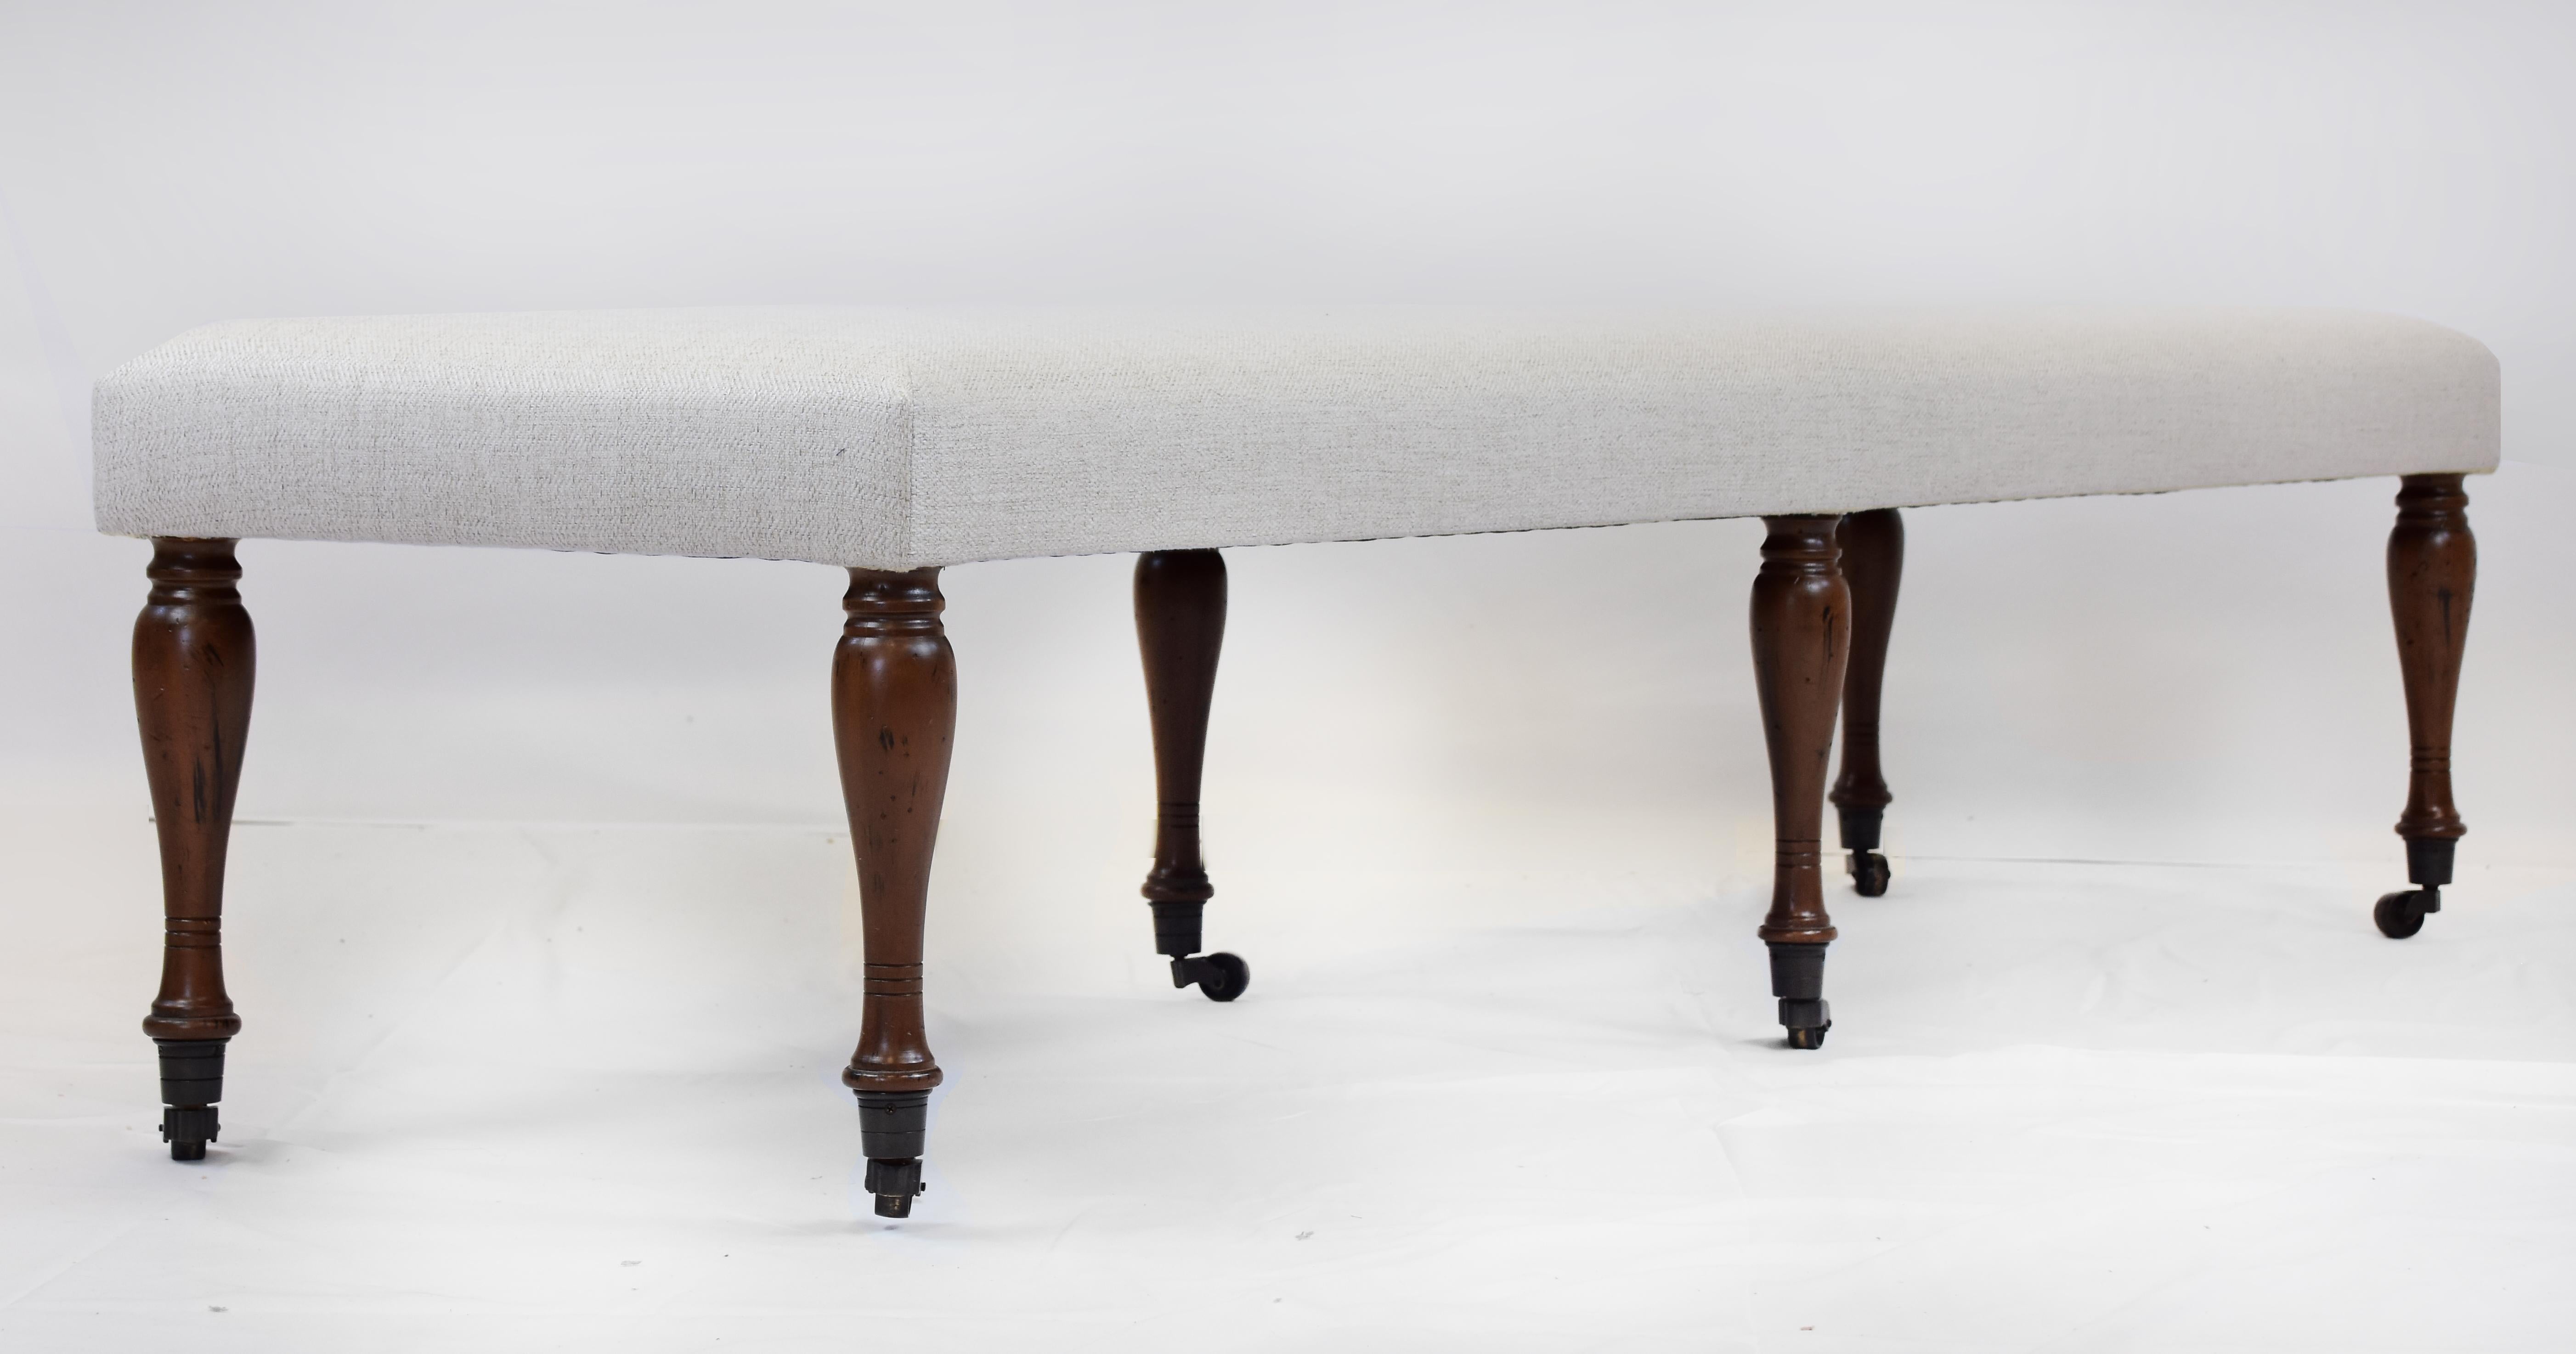 Le Jeune Upholstery Antoinette Long Bench Floor Model with Casters

Offered for sale is the  Antoinette Long Bench showroom model with six turned walnut legs and brass casters created in the 19th-century style.  The legs are finished in a cognac